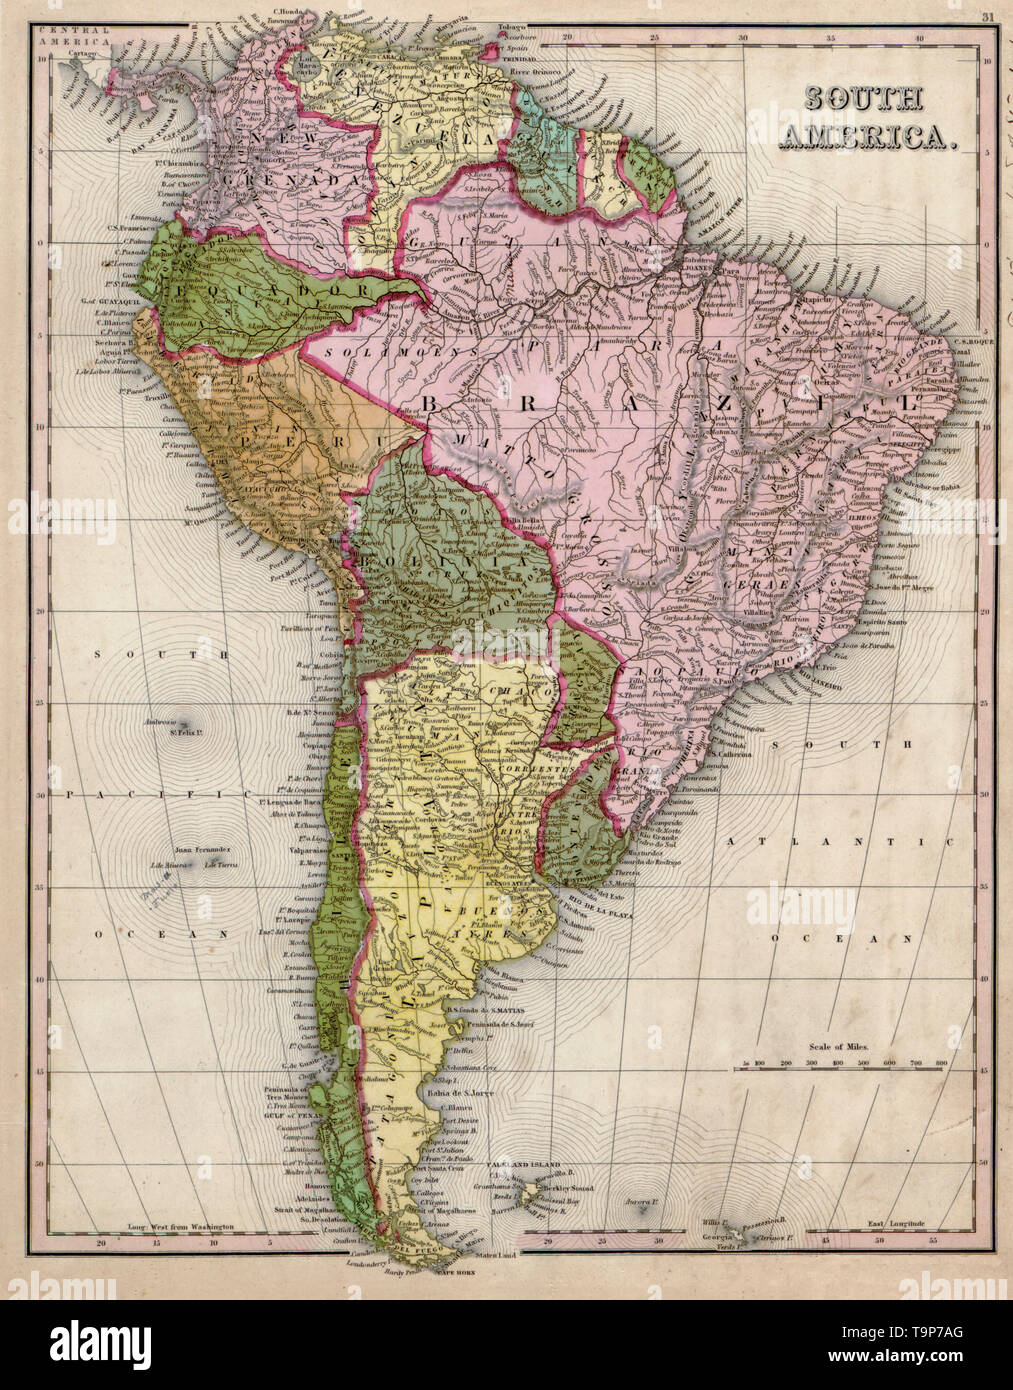 Map of South America, 1844 Stock Photo